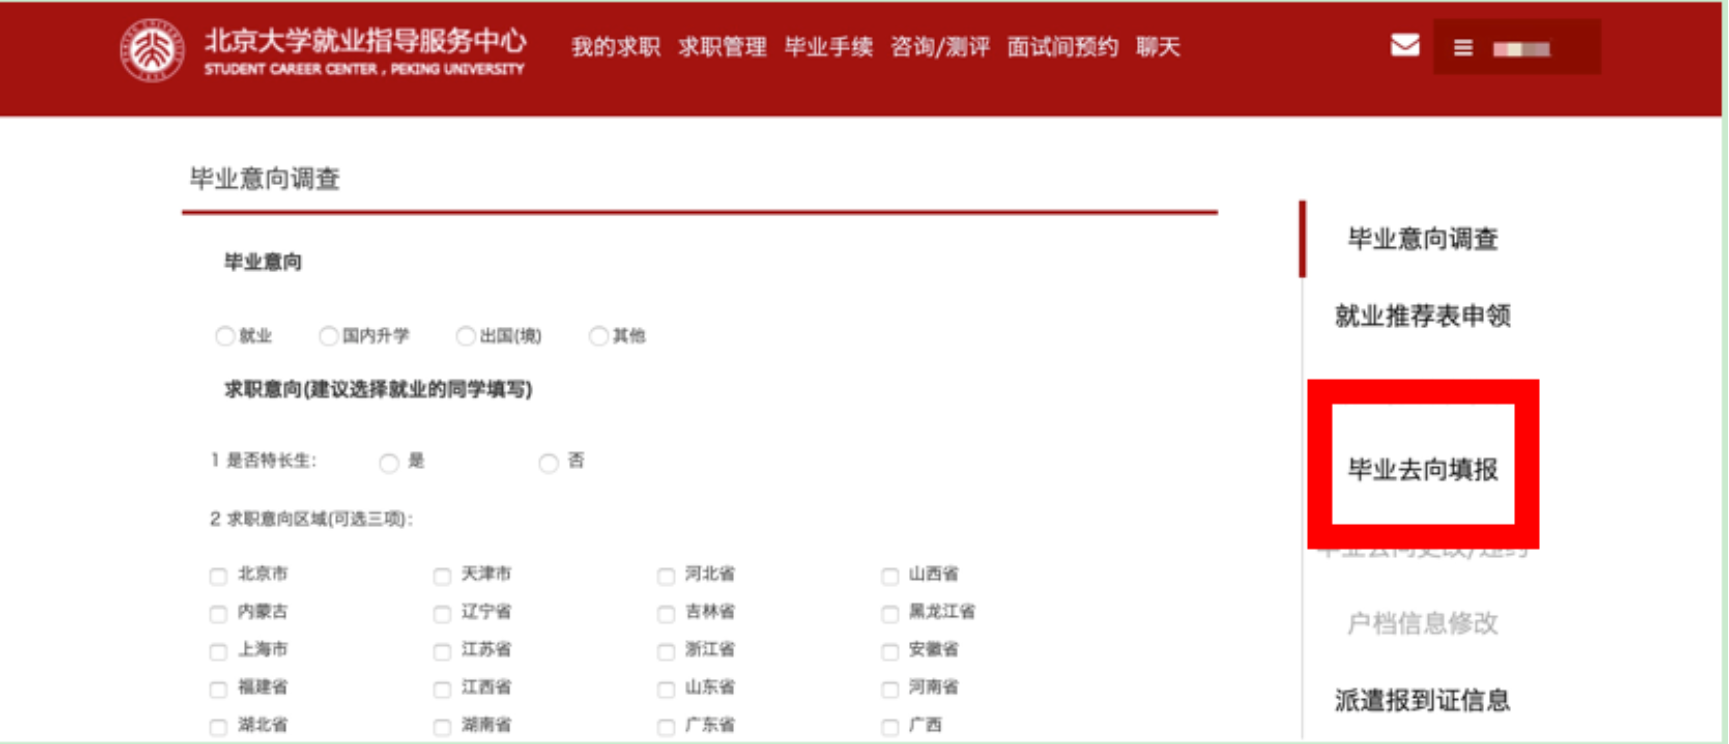 C:\Users\hpjia\Documents\WeChat Files\wxid_cpoee79ngceh12\FileStorage\Temp\80527f8e4a8fbc84714f20ba66eda96.png